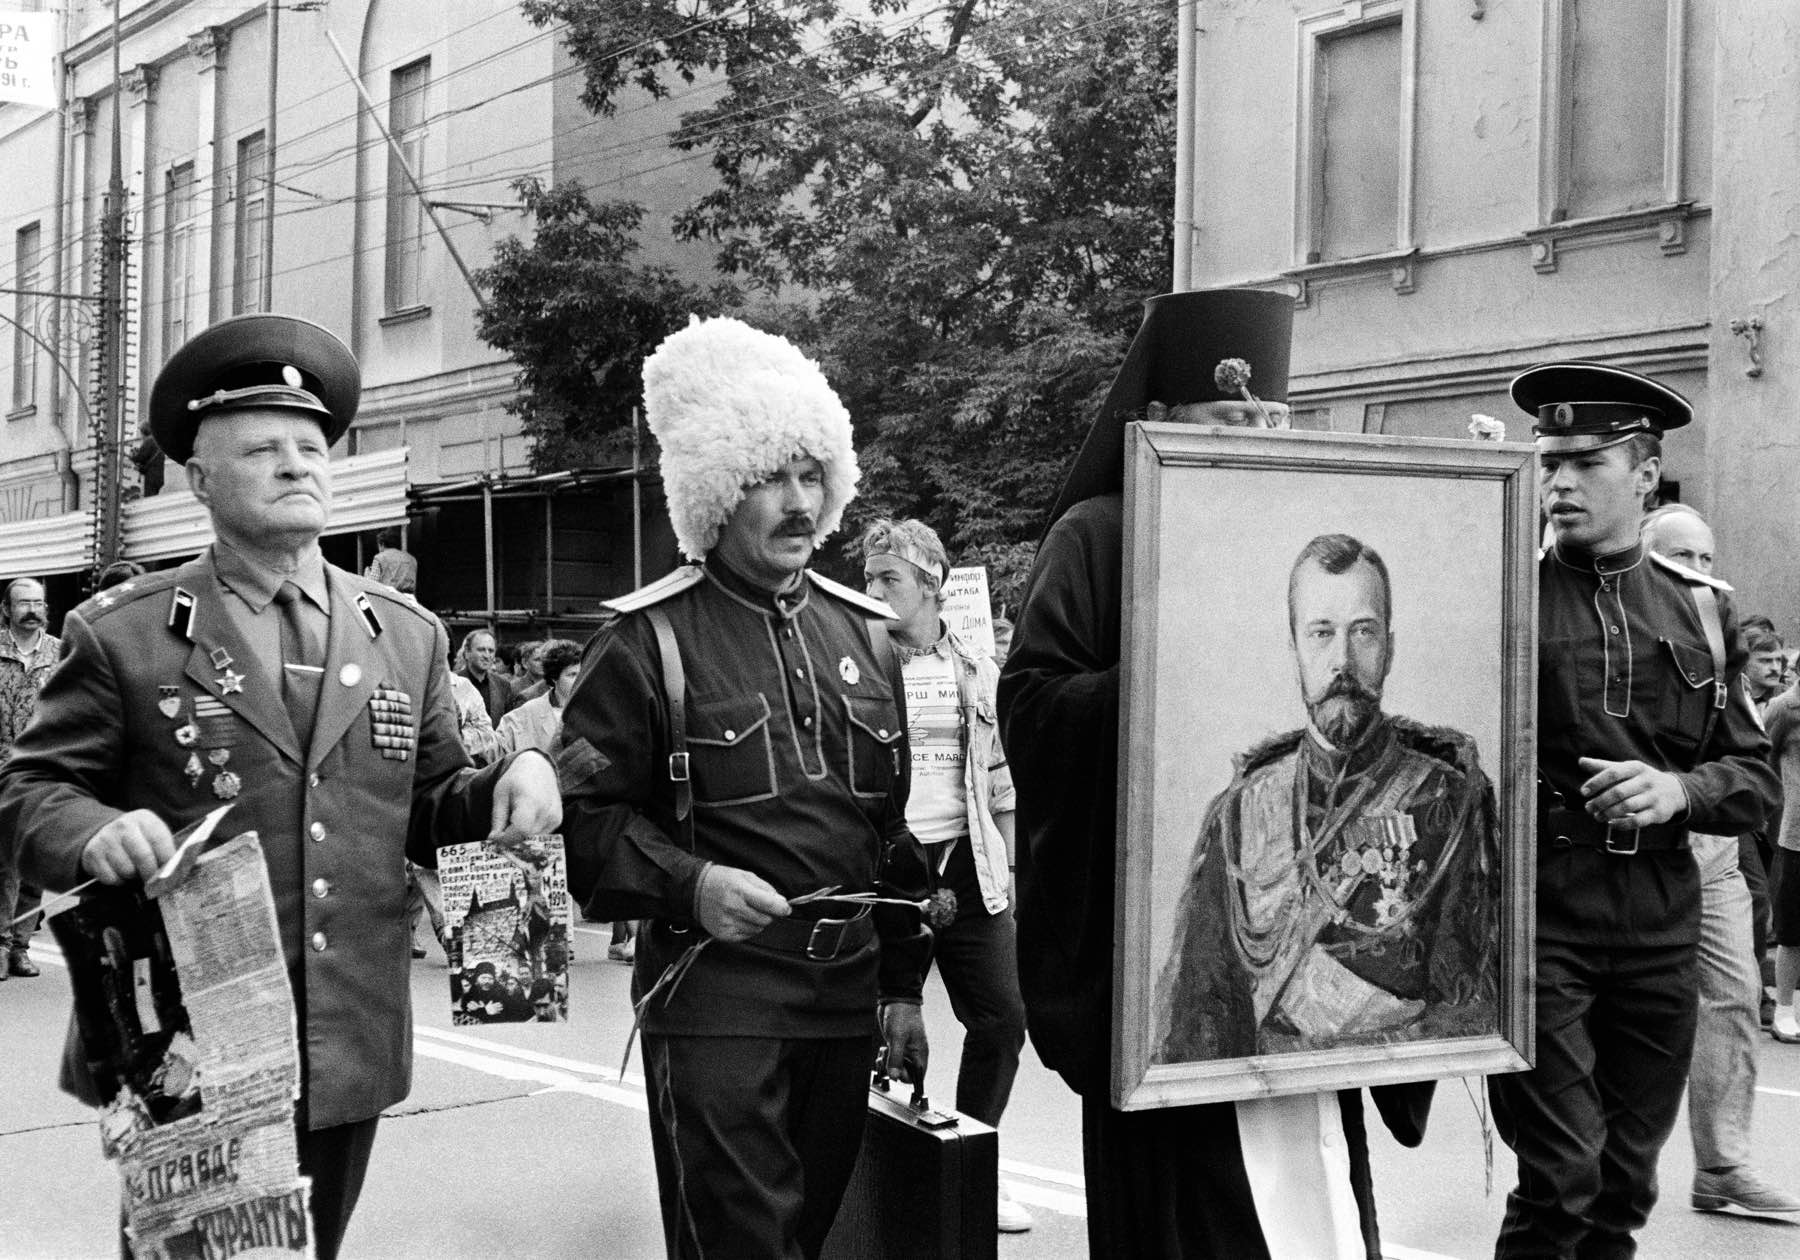 1991 coup d’état. Two military personnel (one of them high-ranking), a Cossack and a priest of the Orthodox Church carrying a portrait of the last Tsar of Russia, Nicholas II